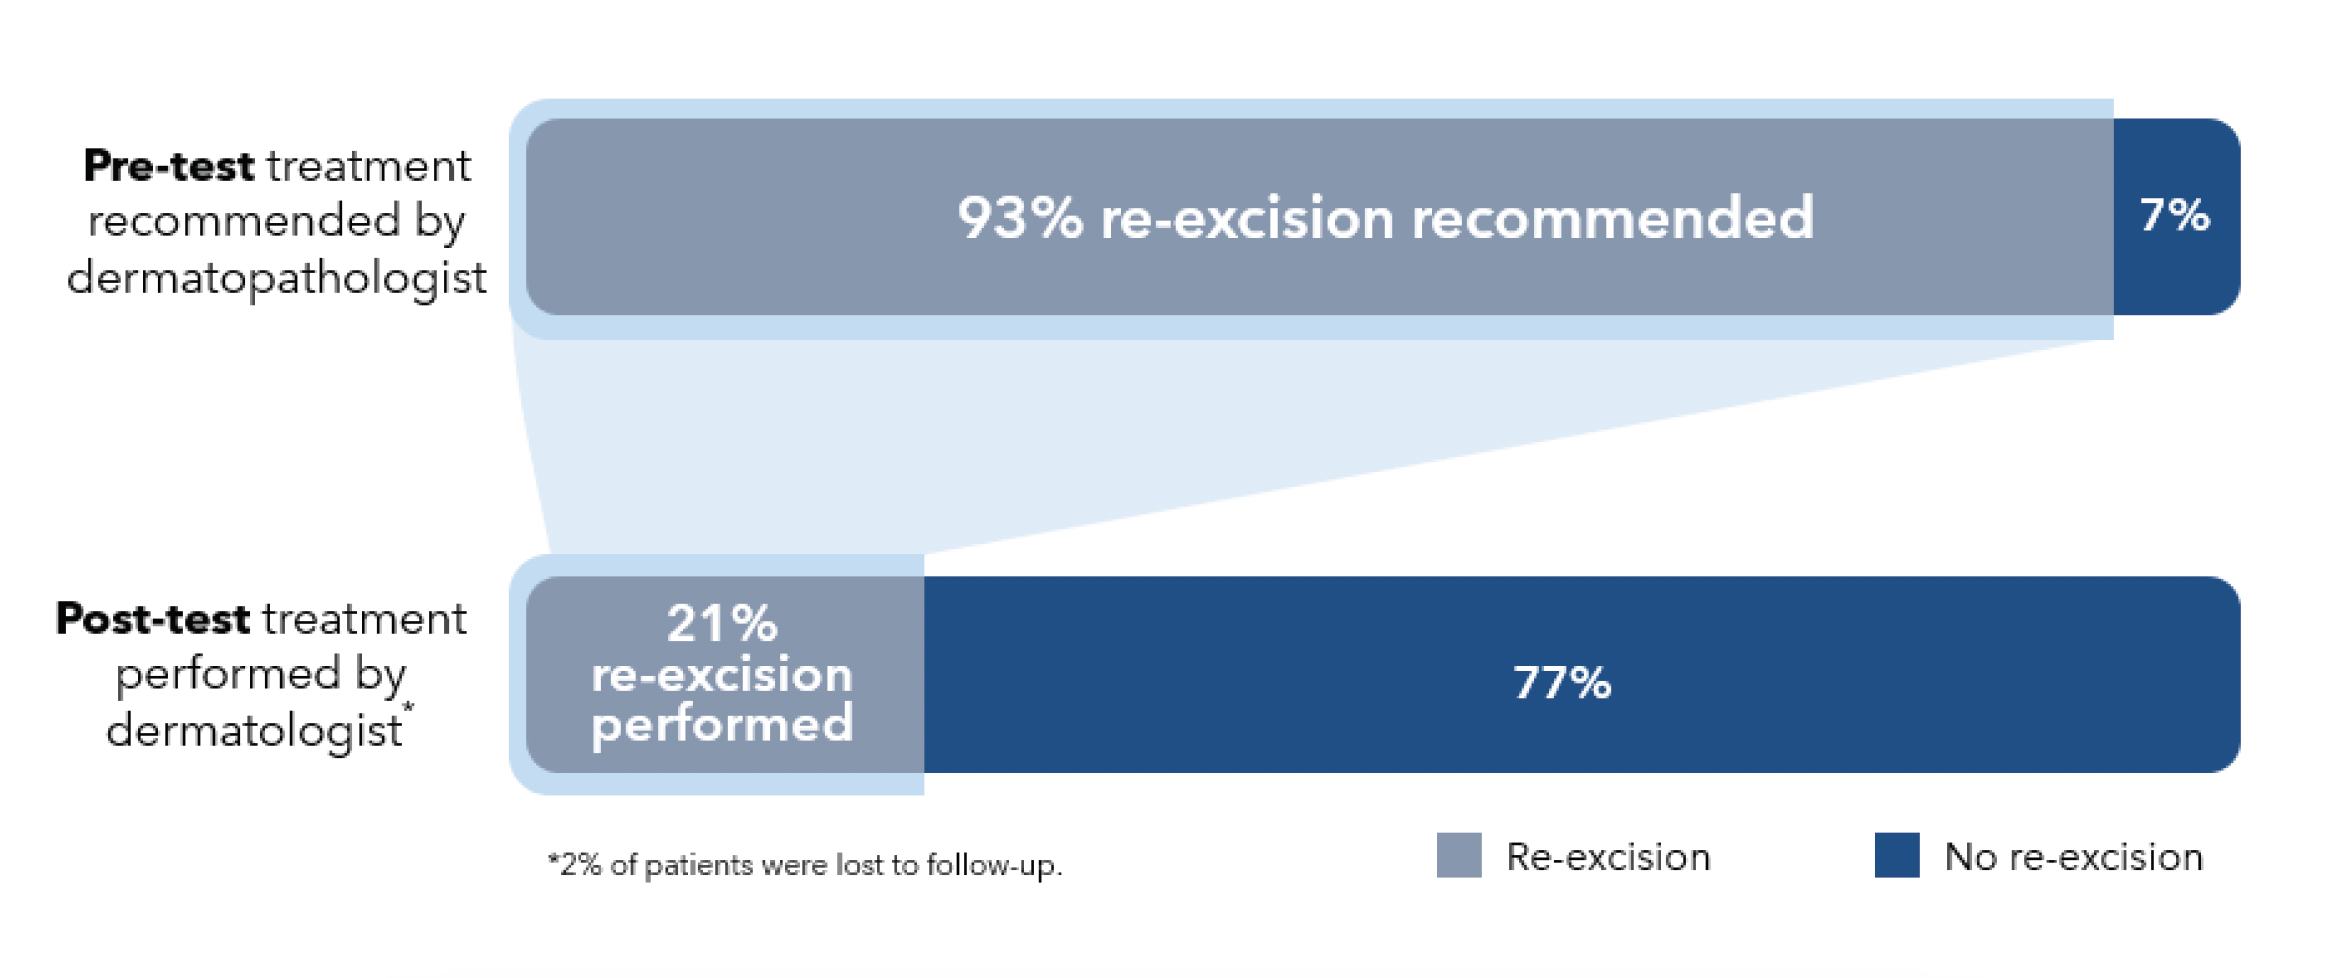 Re-excision was initially recommended for 93% of lesions. After GEP testing, re-excision was performed on only 21%. 